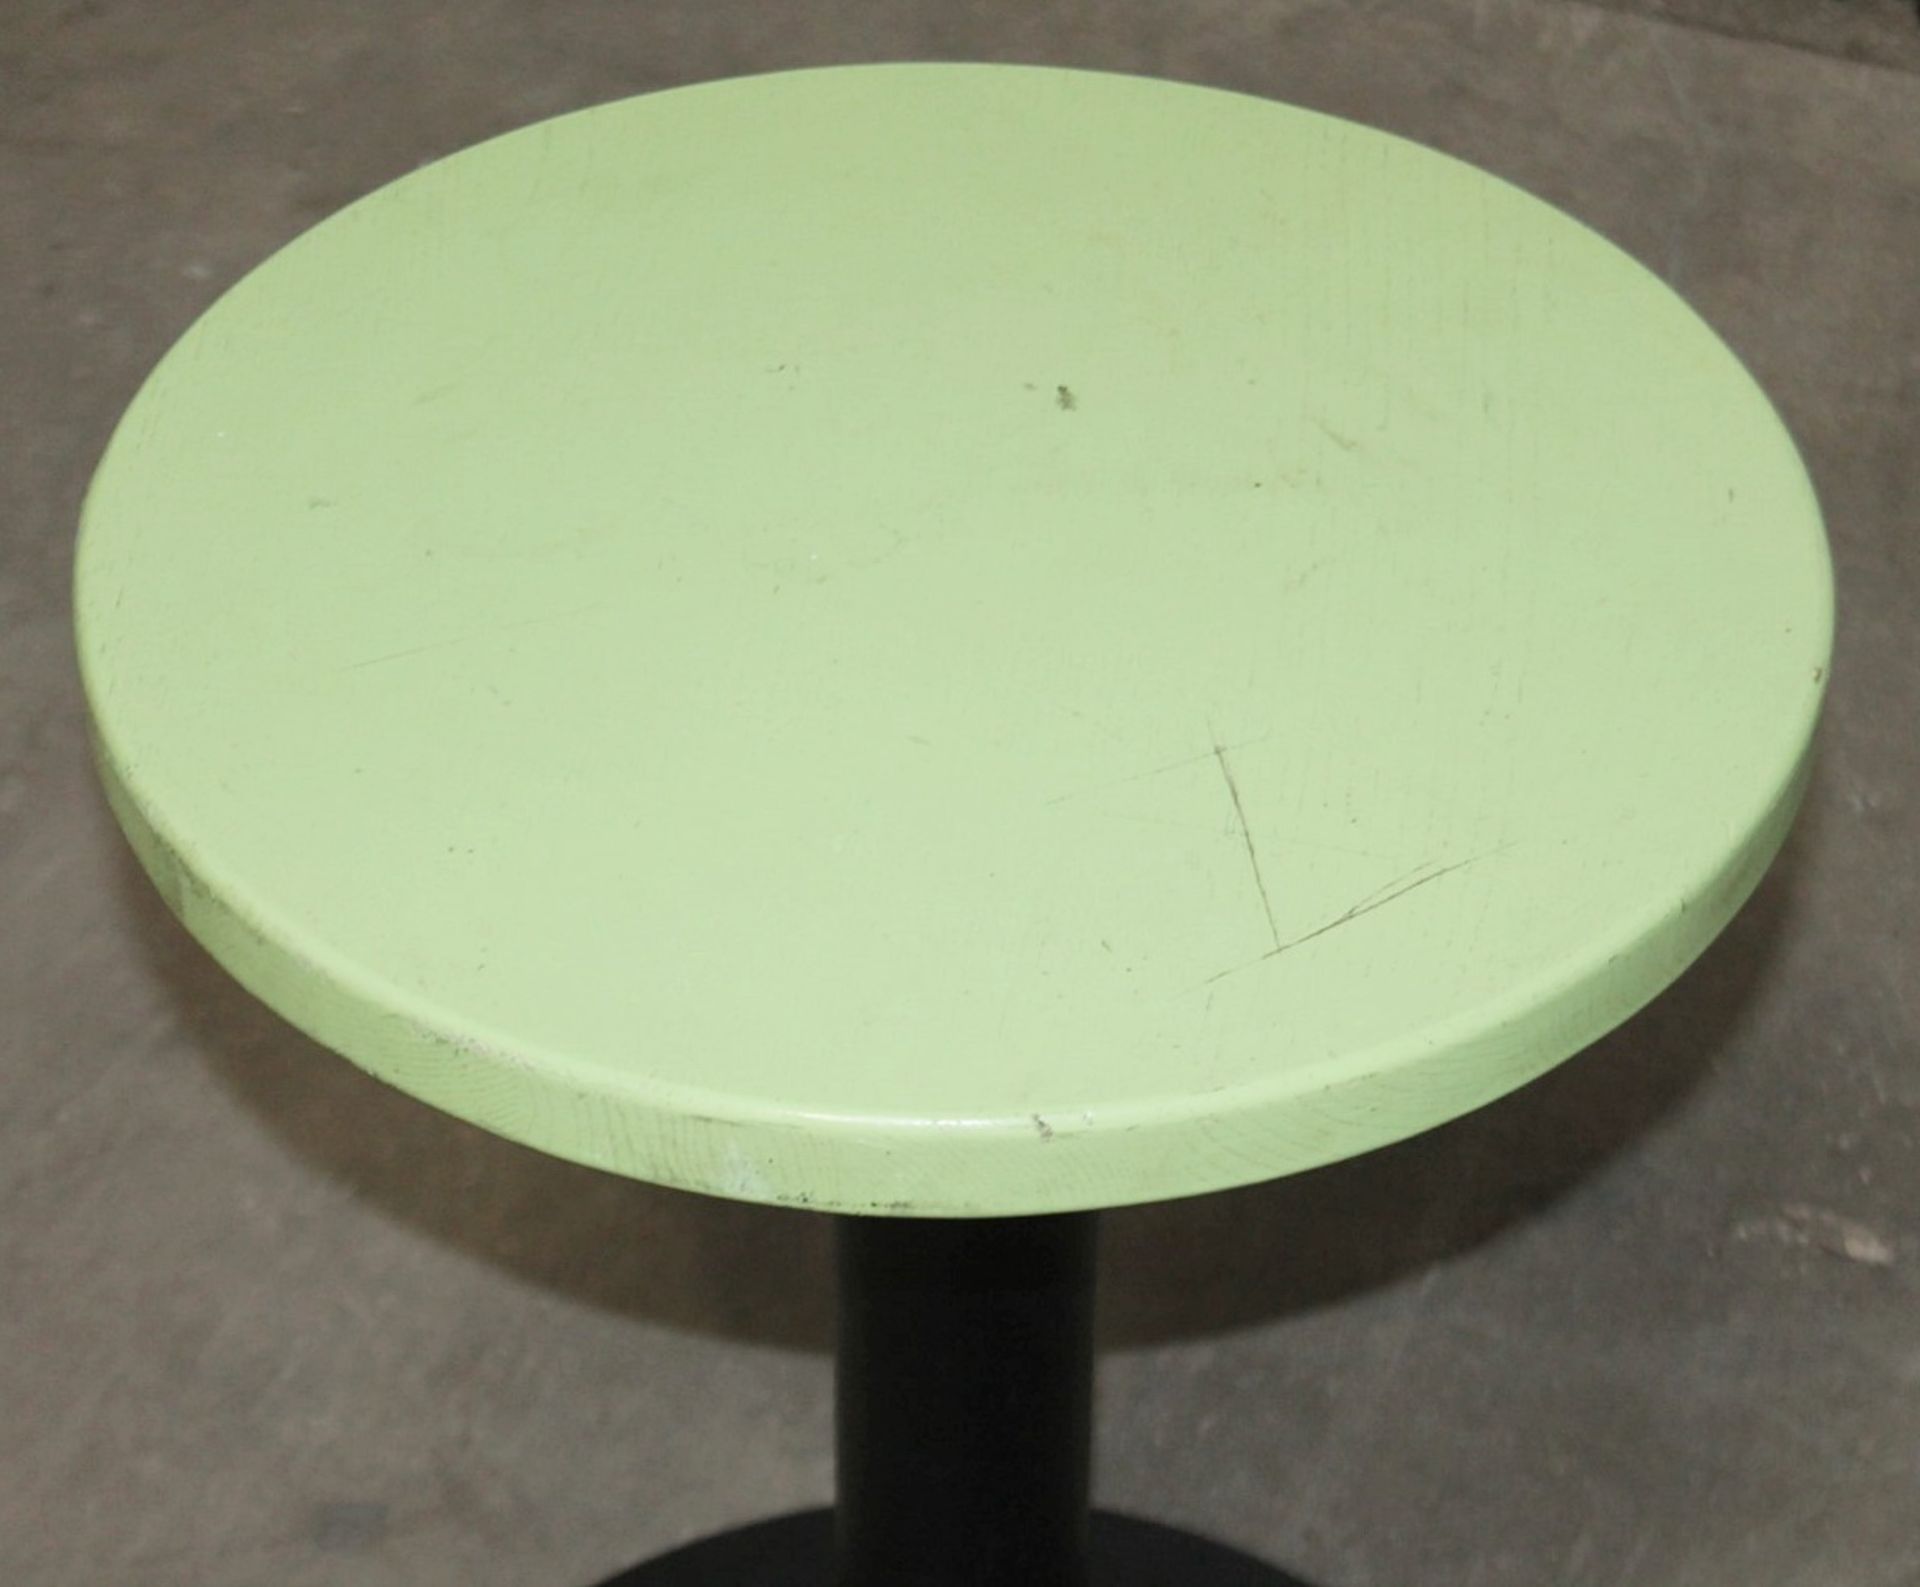 1 x Rustic Low Profile Bespoke Bar Table With A Lime Green Paineted Top - Dimensions: H61 x - Image 2 of 4